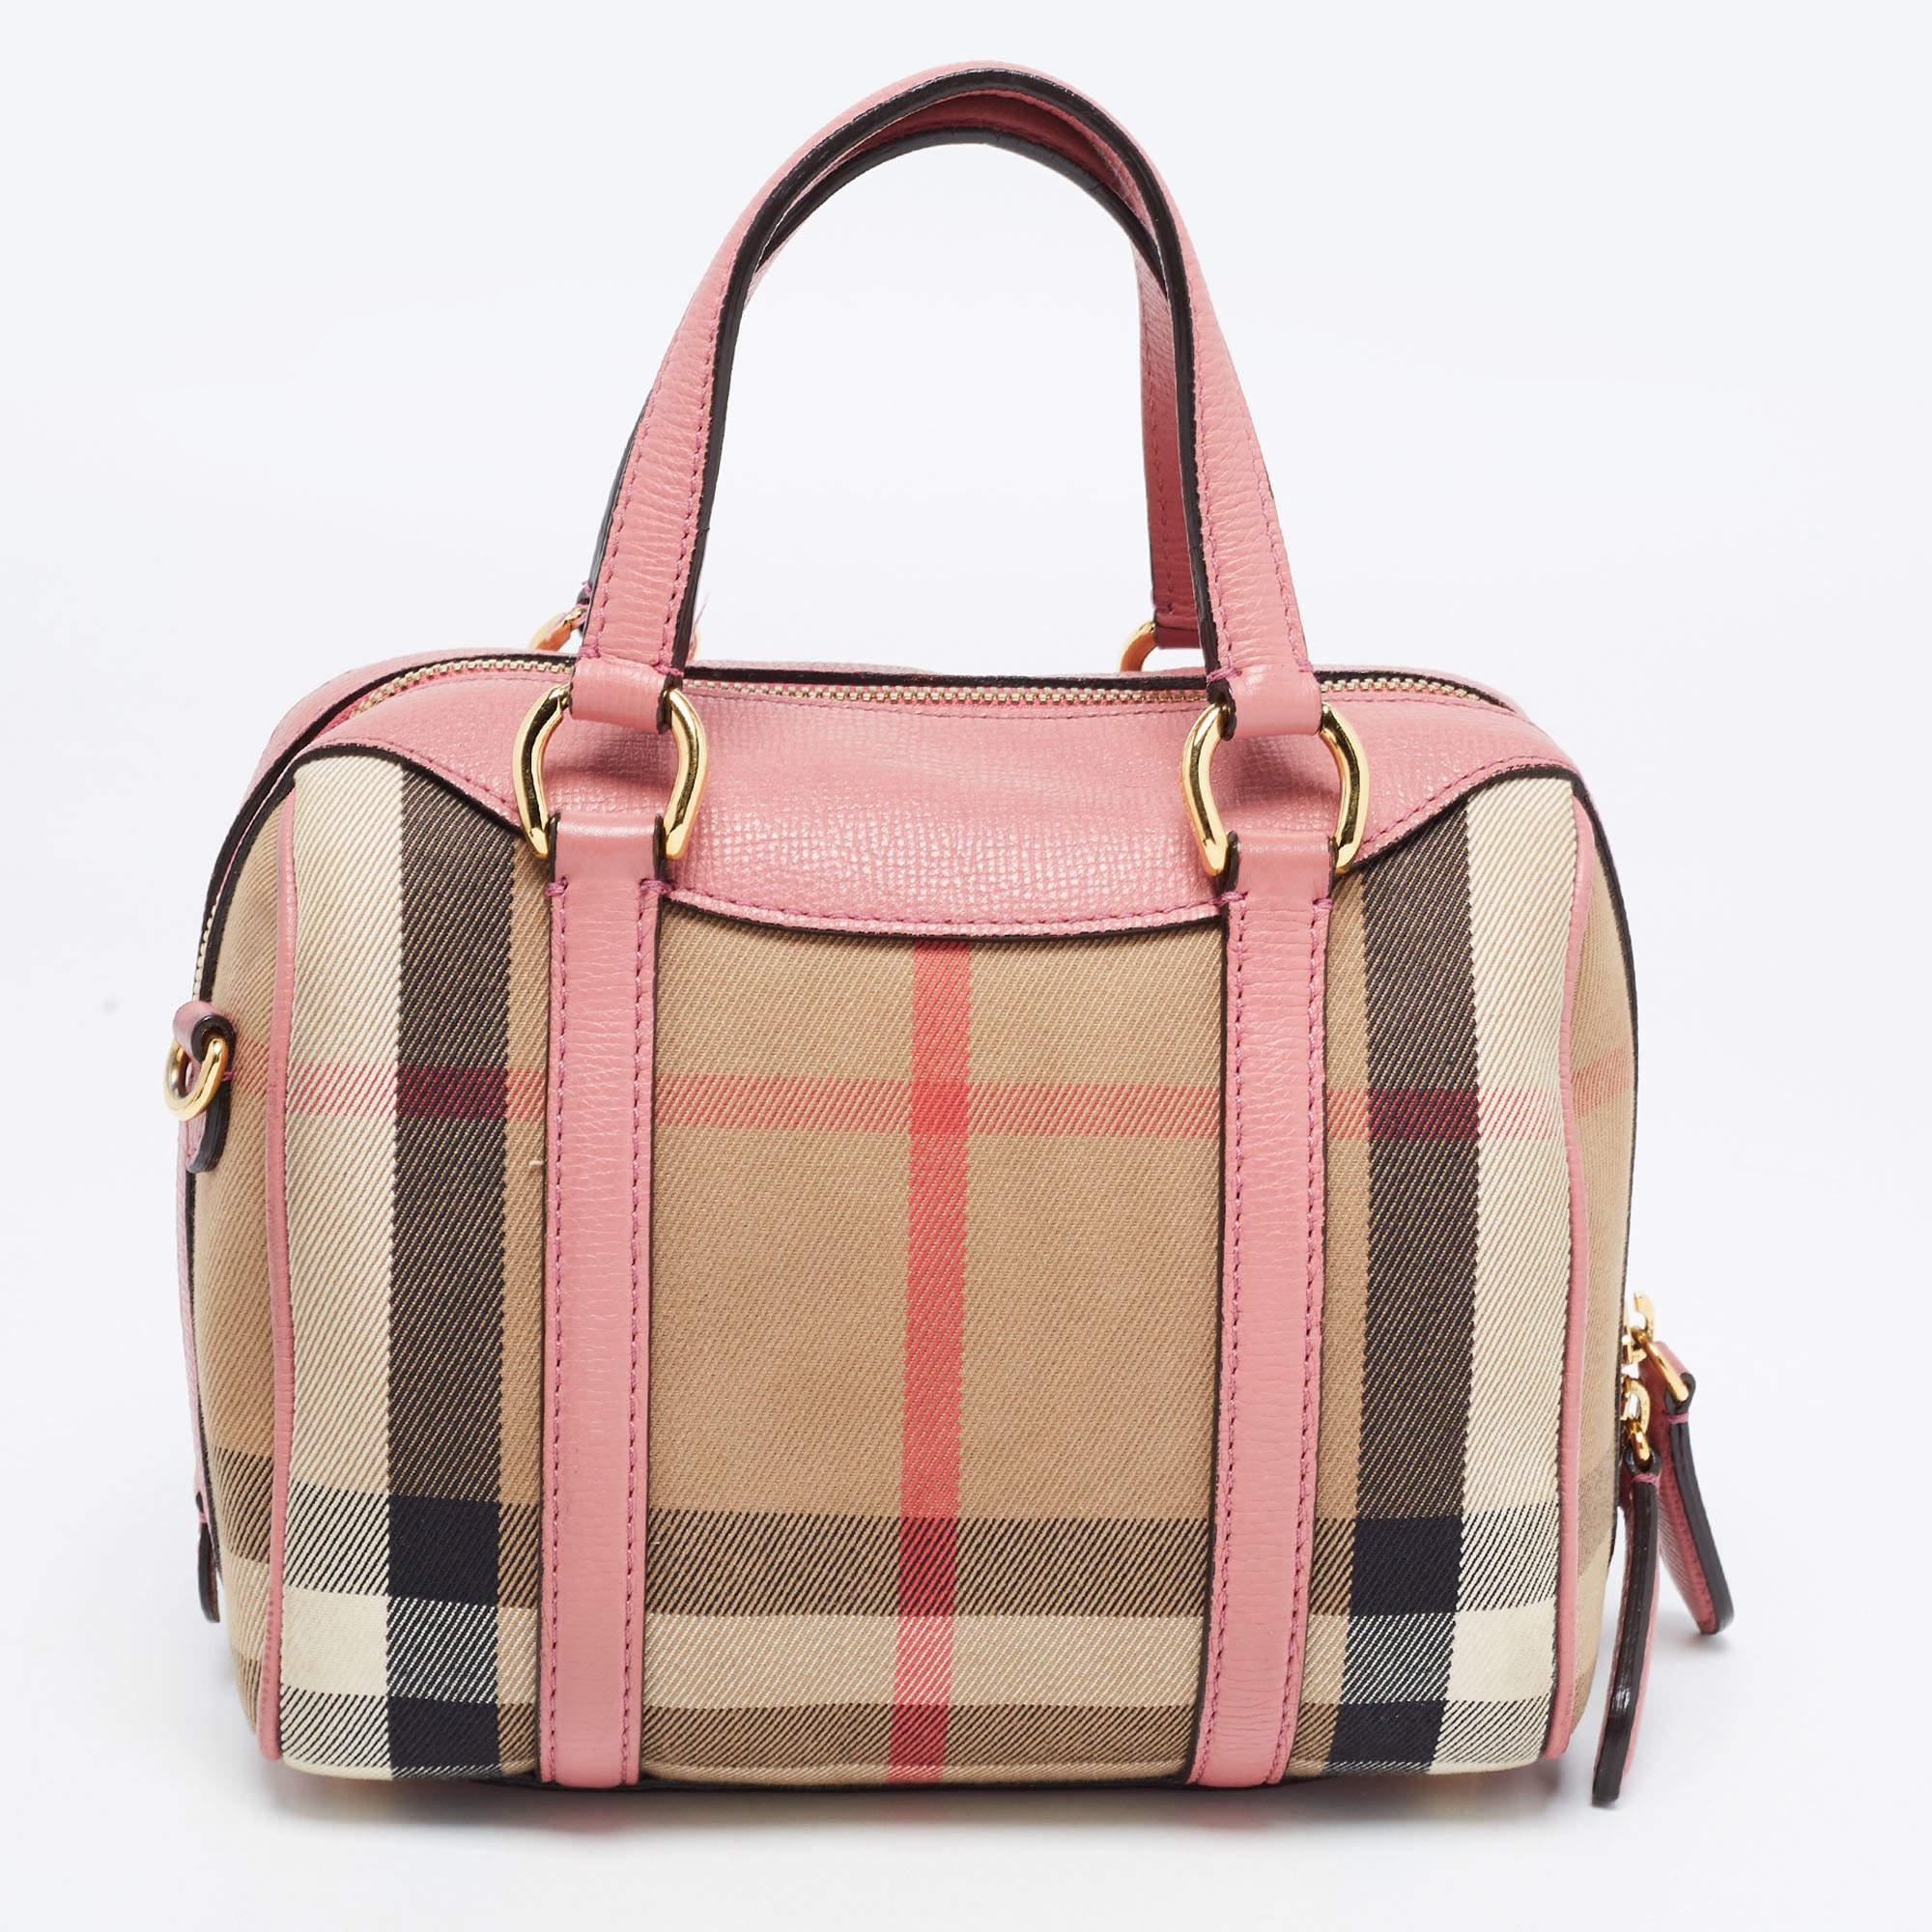 Known for unmatchable quality, Burberry's bags make great daily companions. Hence, this smart and pretty Bowler bag is not only an attractive accessory that will elevate your look but is also spacious enough to hold all your everyday